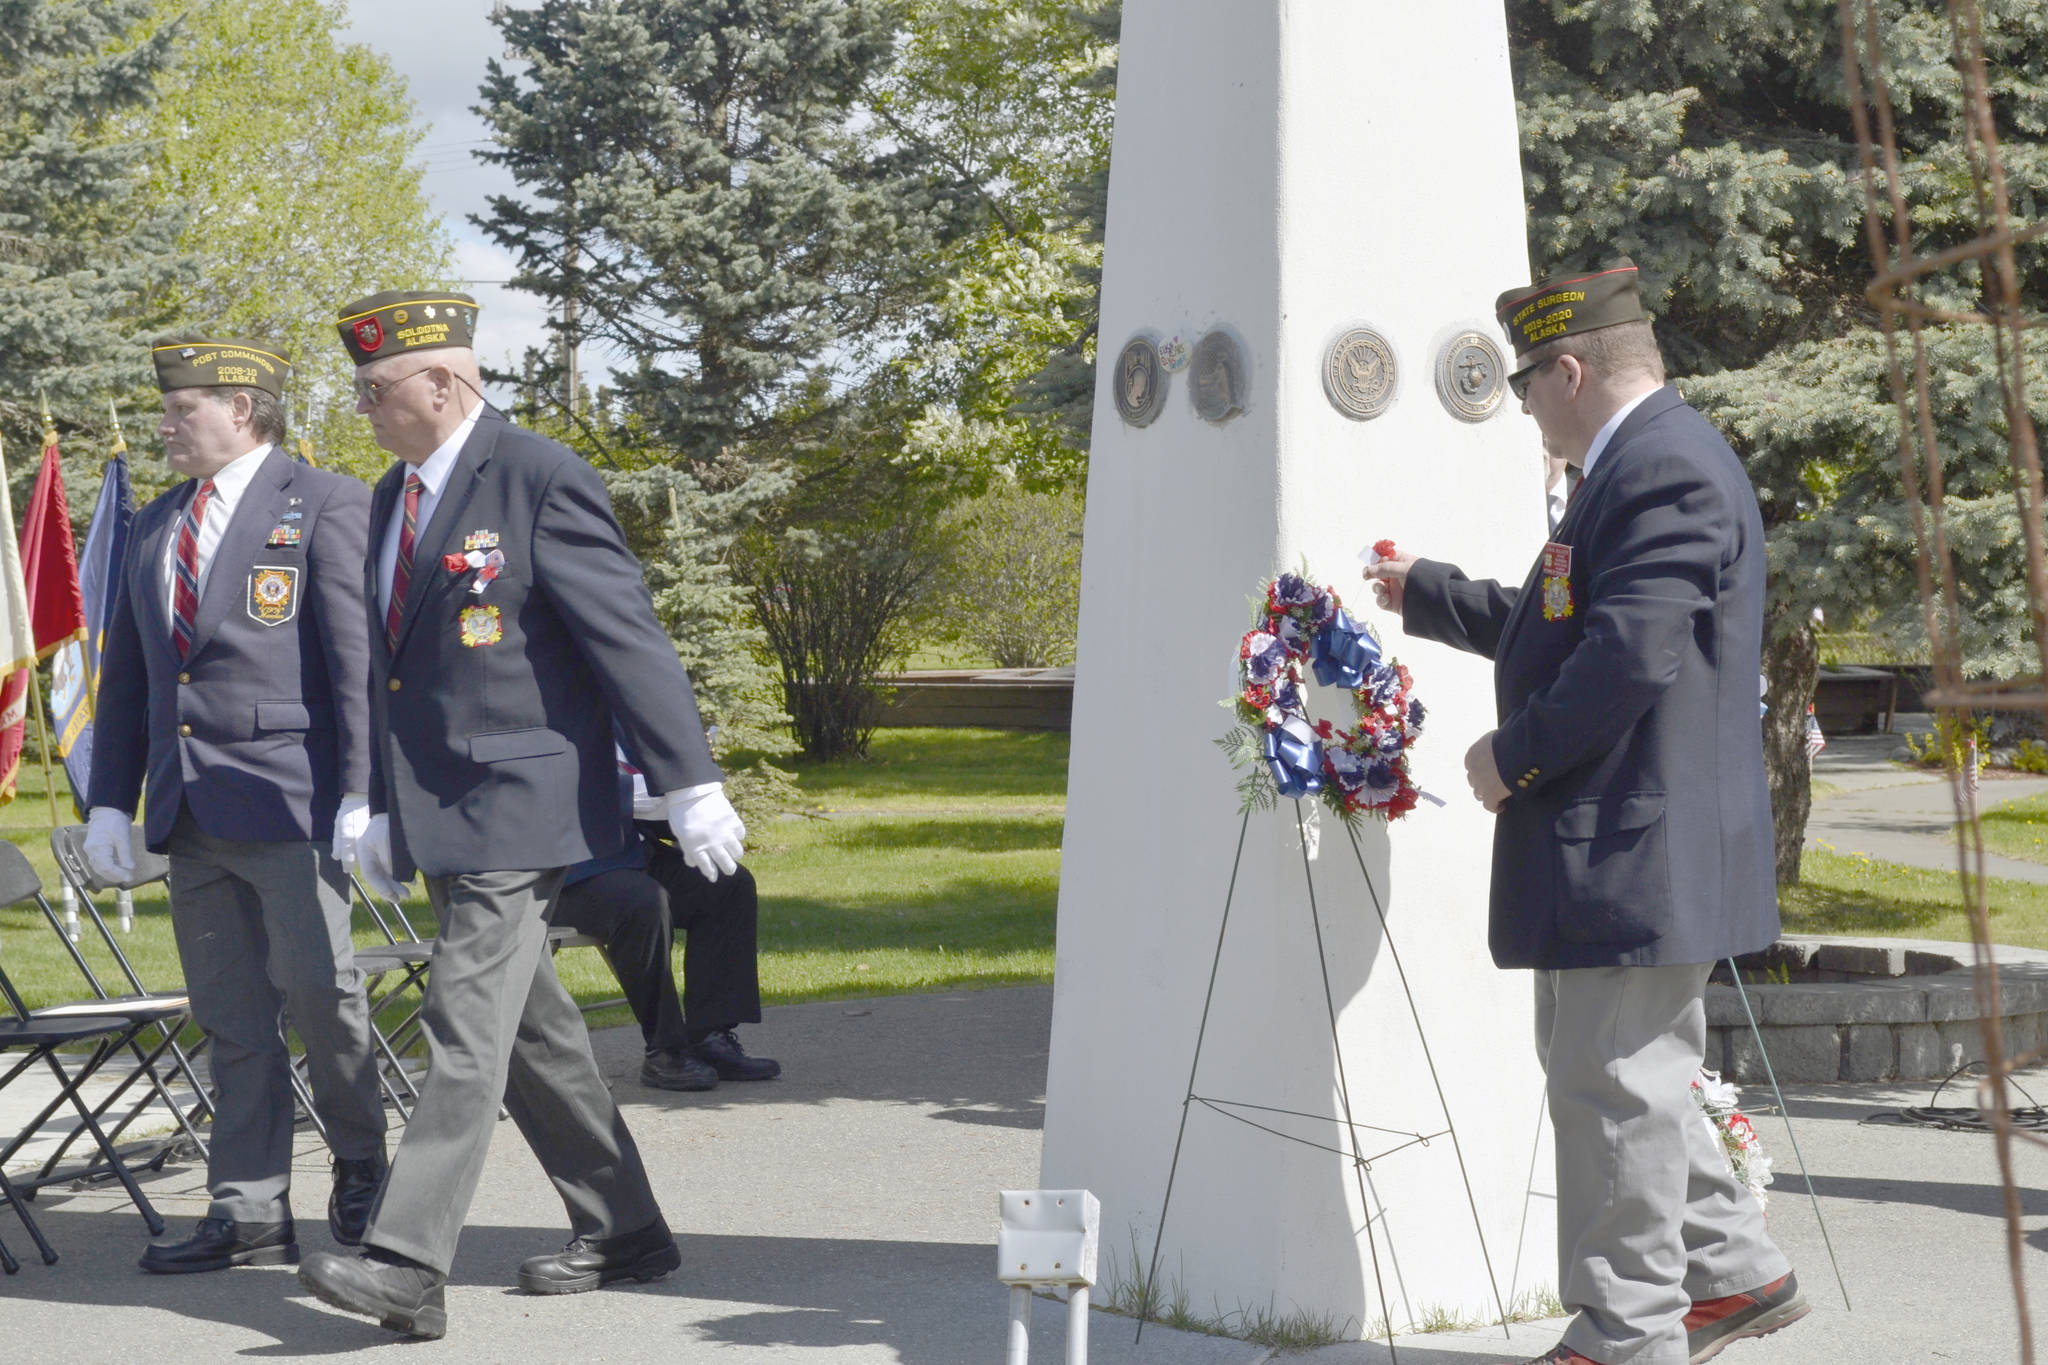 Families were invited to place flowers and wreaths in remembrance of fallen service members at Kenai’s Memorial Day ceremony on Monday, May 27, 2019, at Leif Hansen Memorial Park in Kenai, Alaska. (Photo by Victoria Petersen/Peninsula Clarion)